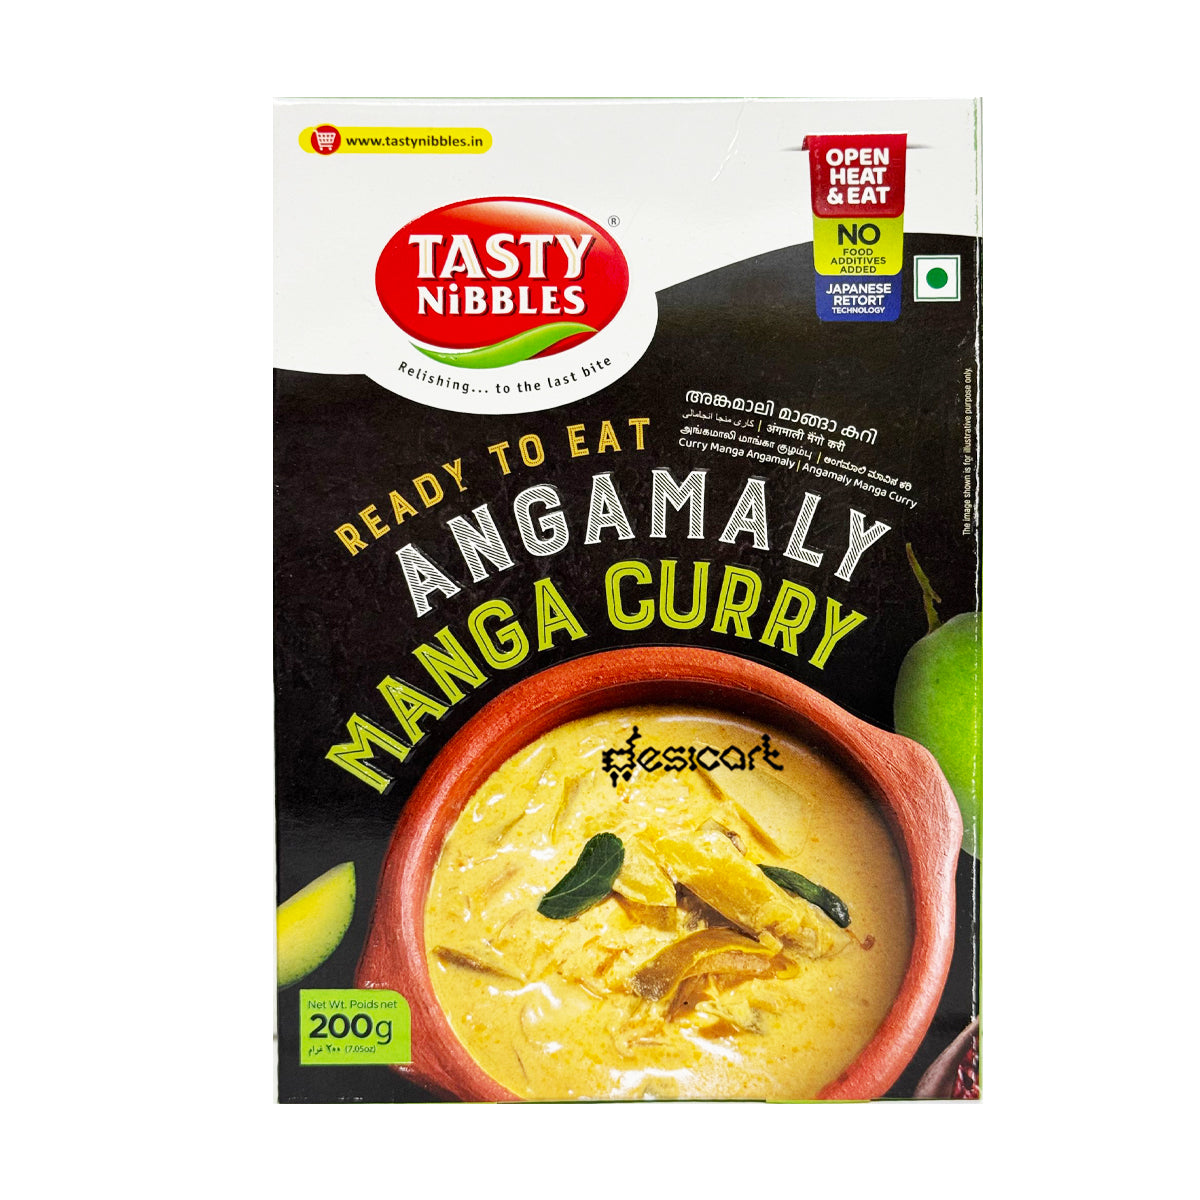 Tasty Nibbles Angamaly Manga Curry 200g